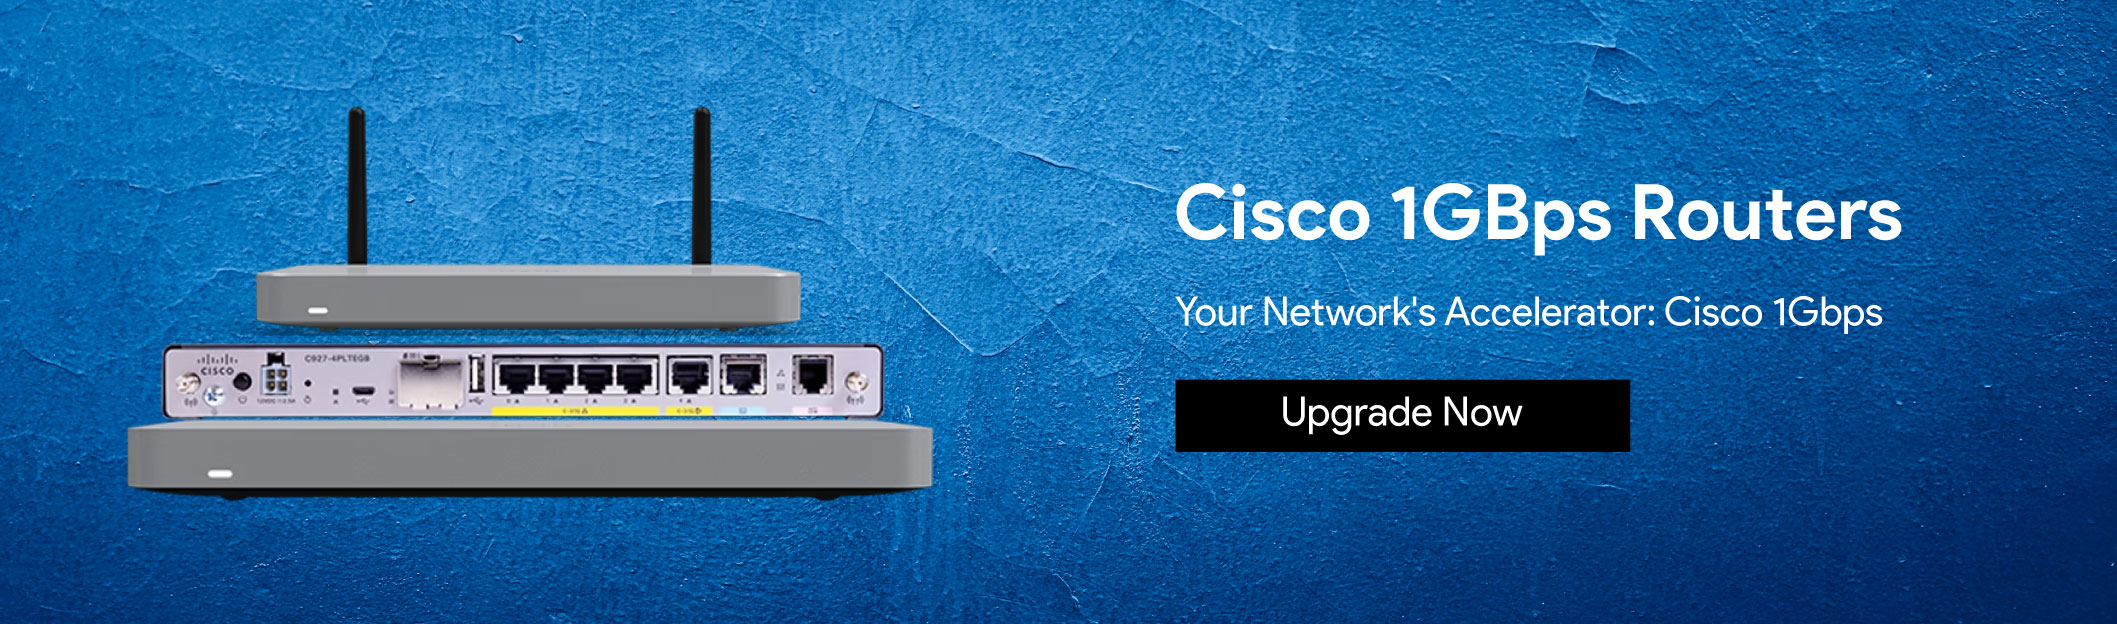 Cisco-1GBps-Routers